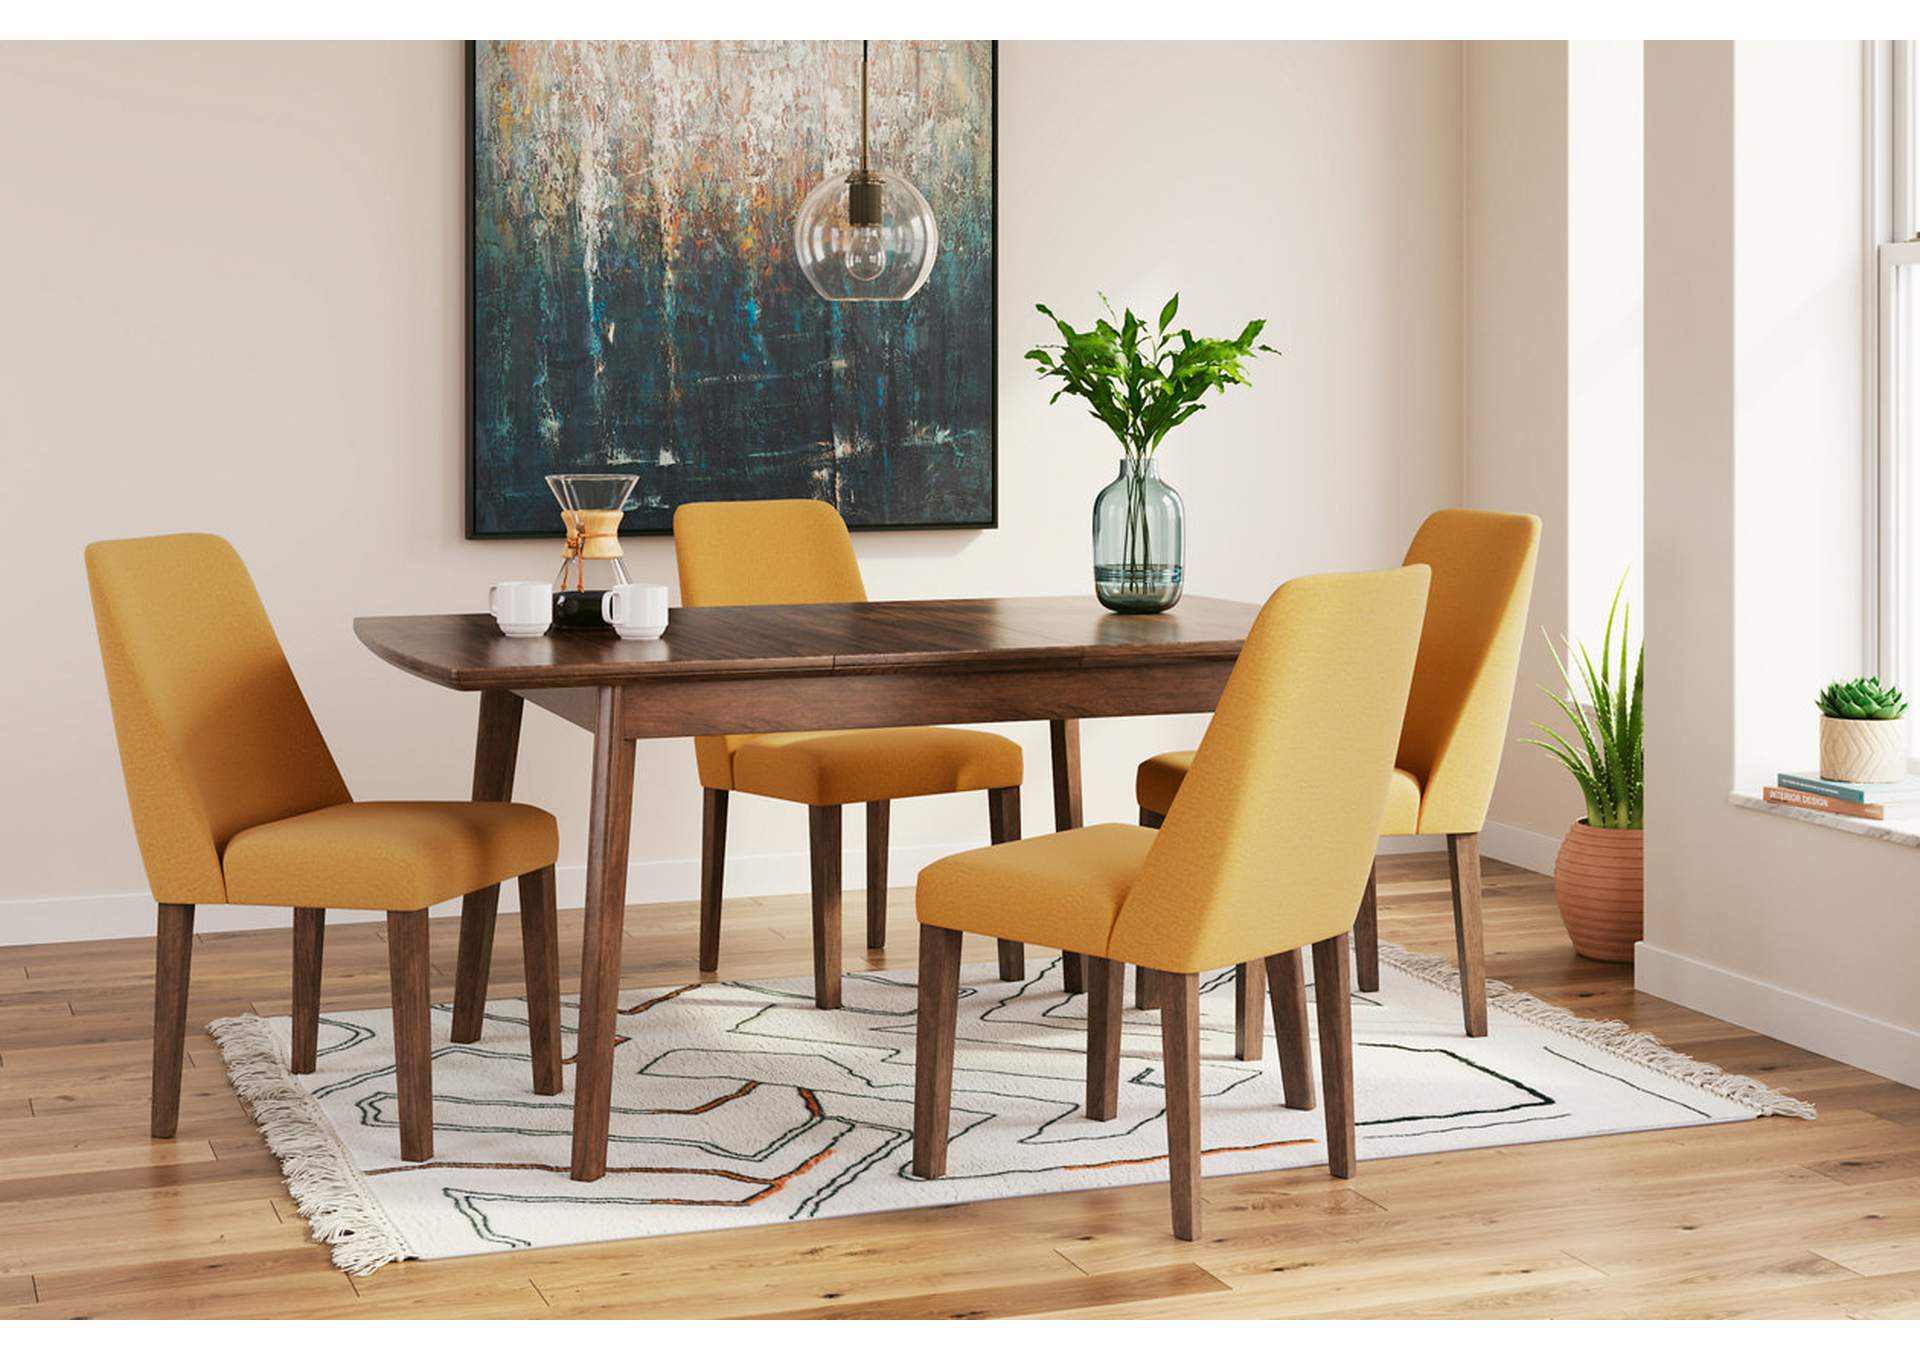 Lyncott Dining Table and 4 Chairs,Signature Design By Ashley